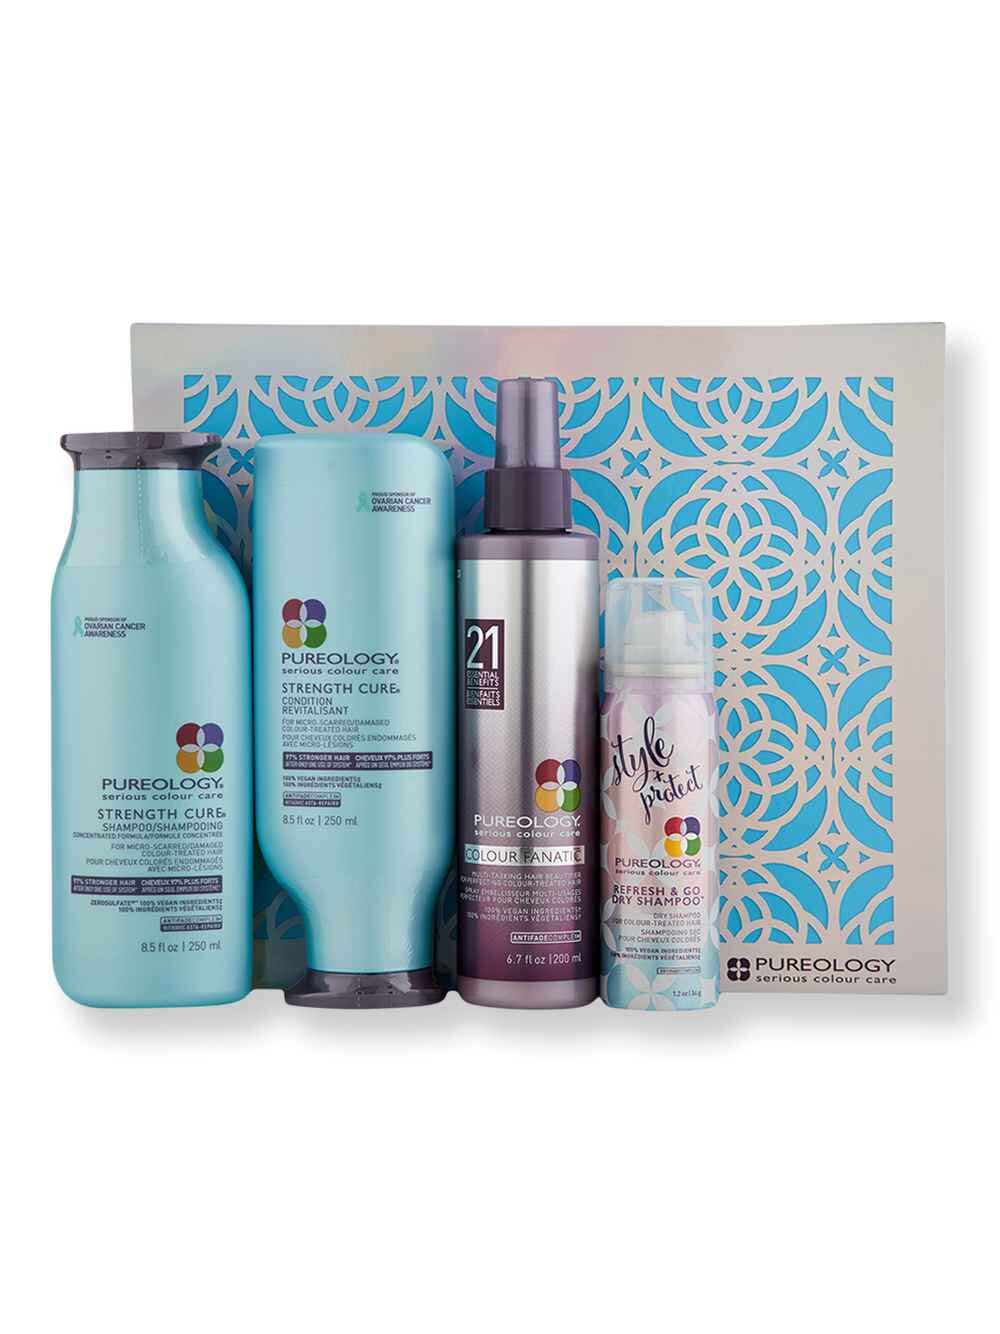 Pureology Pureology Strength Cure Holiday Gift Set Hair Care Value Sets 